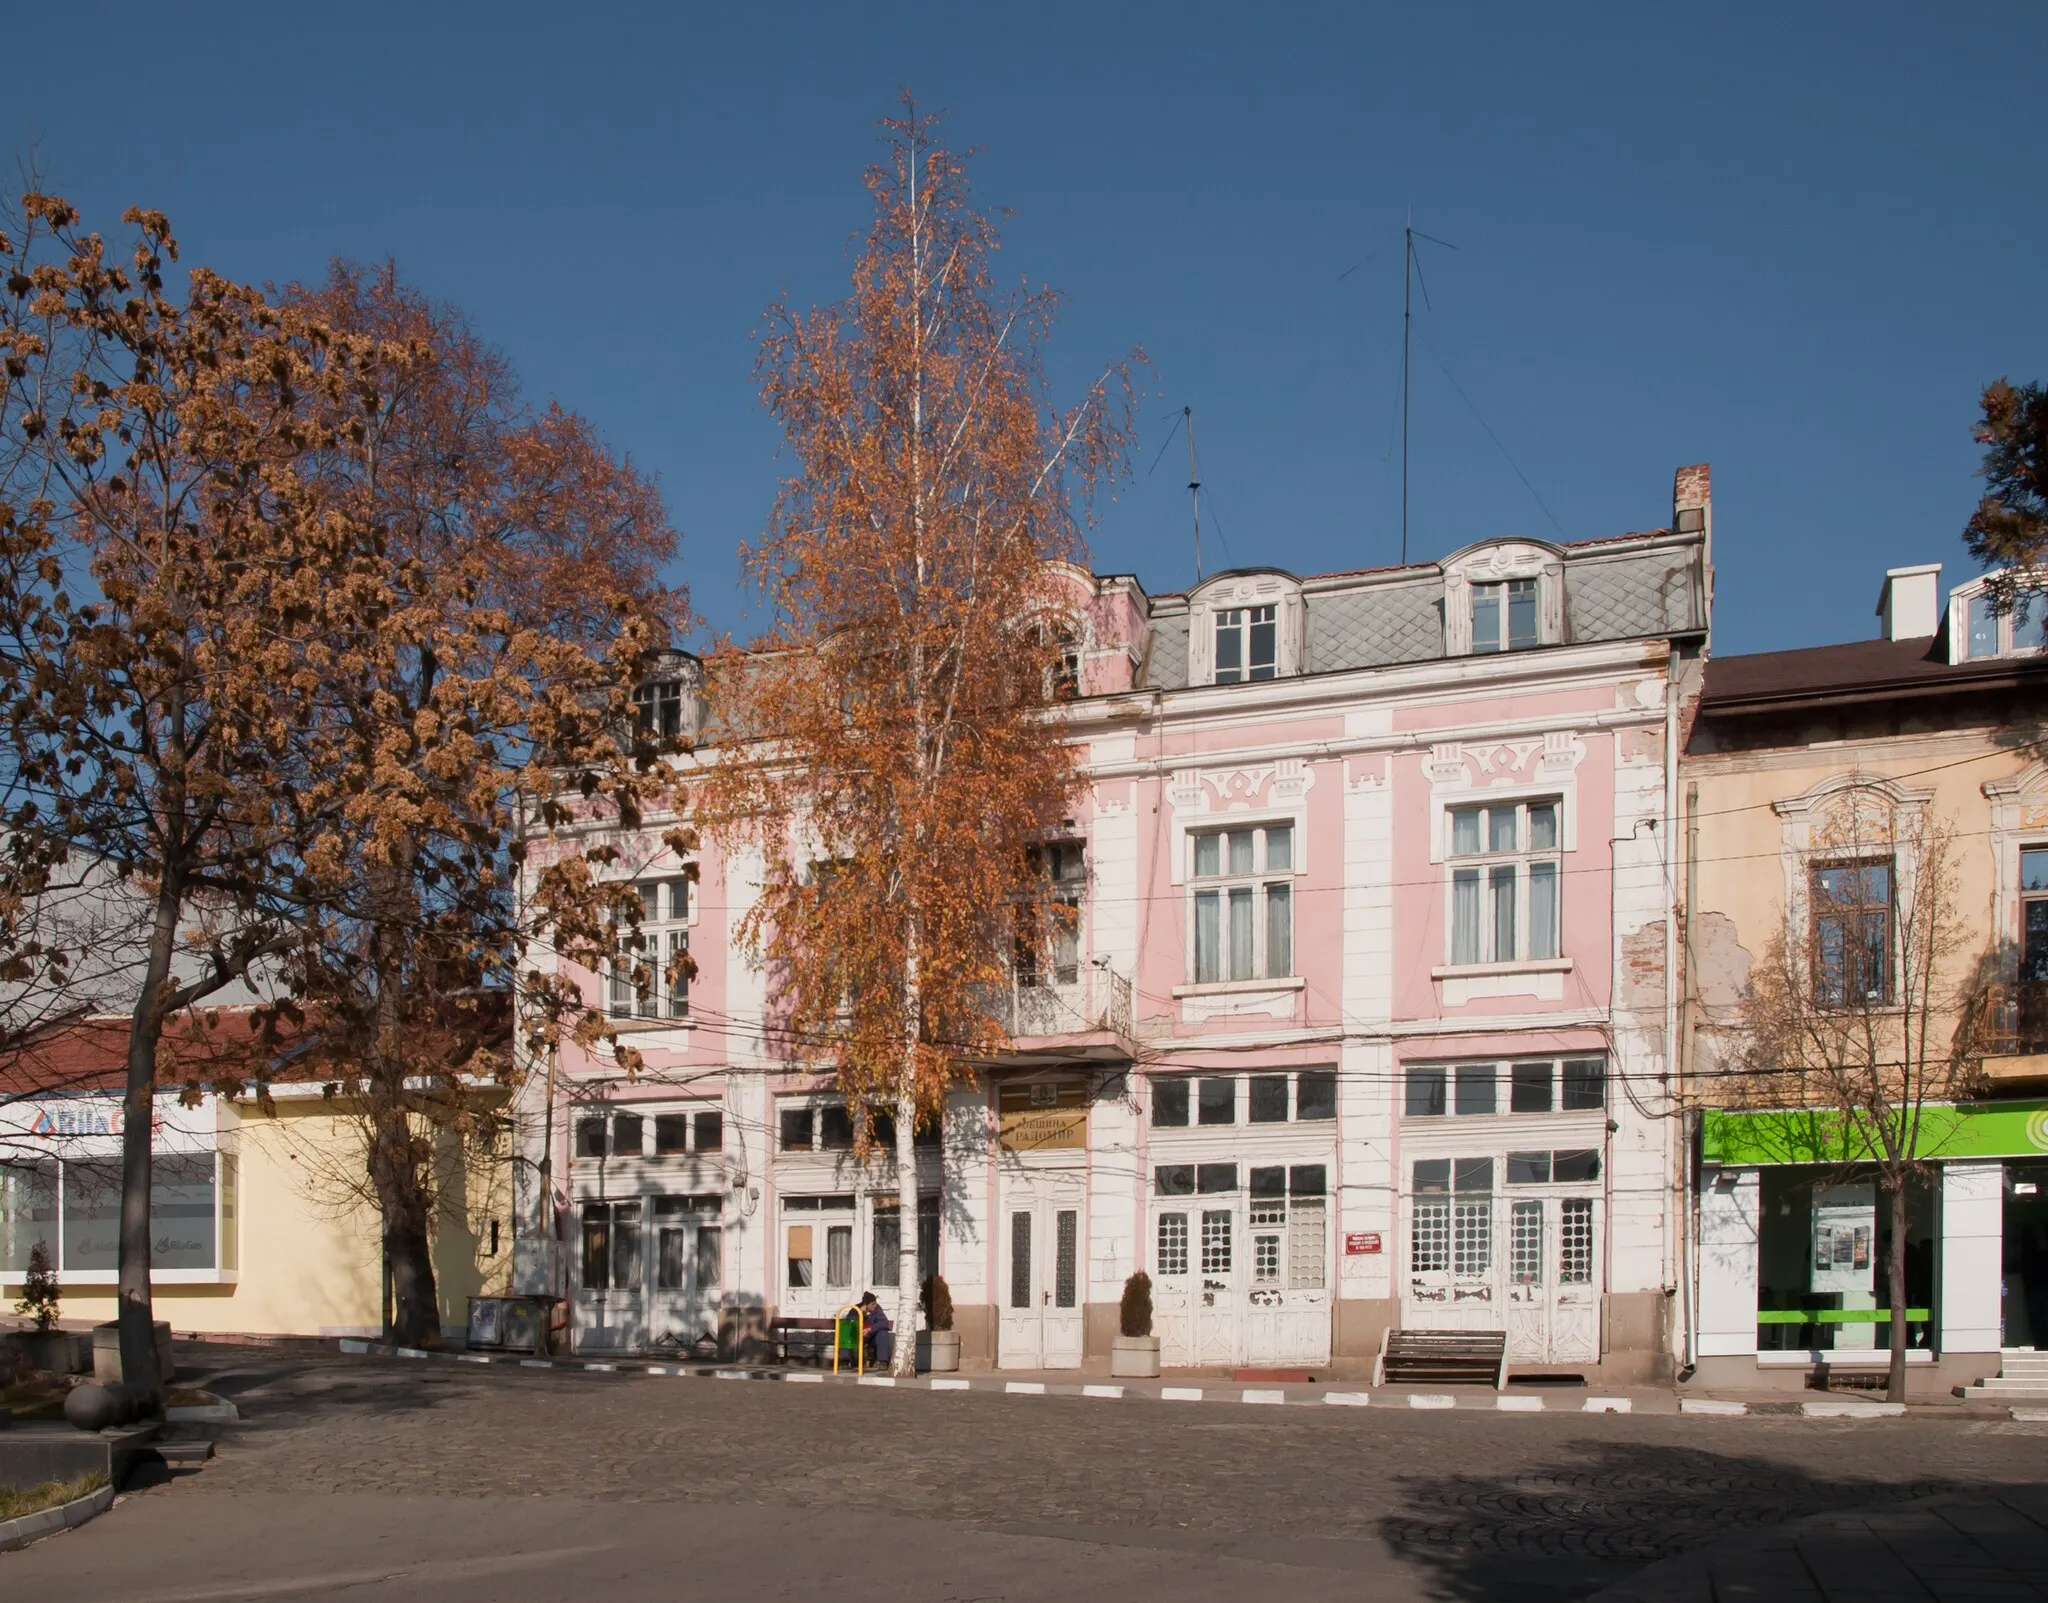 Photo showing: The Old Town Hall in Radomir, Bulgaria.